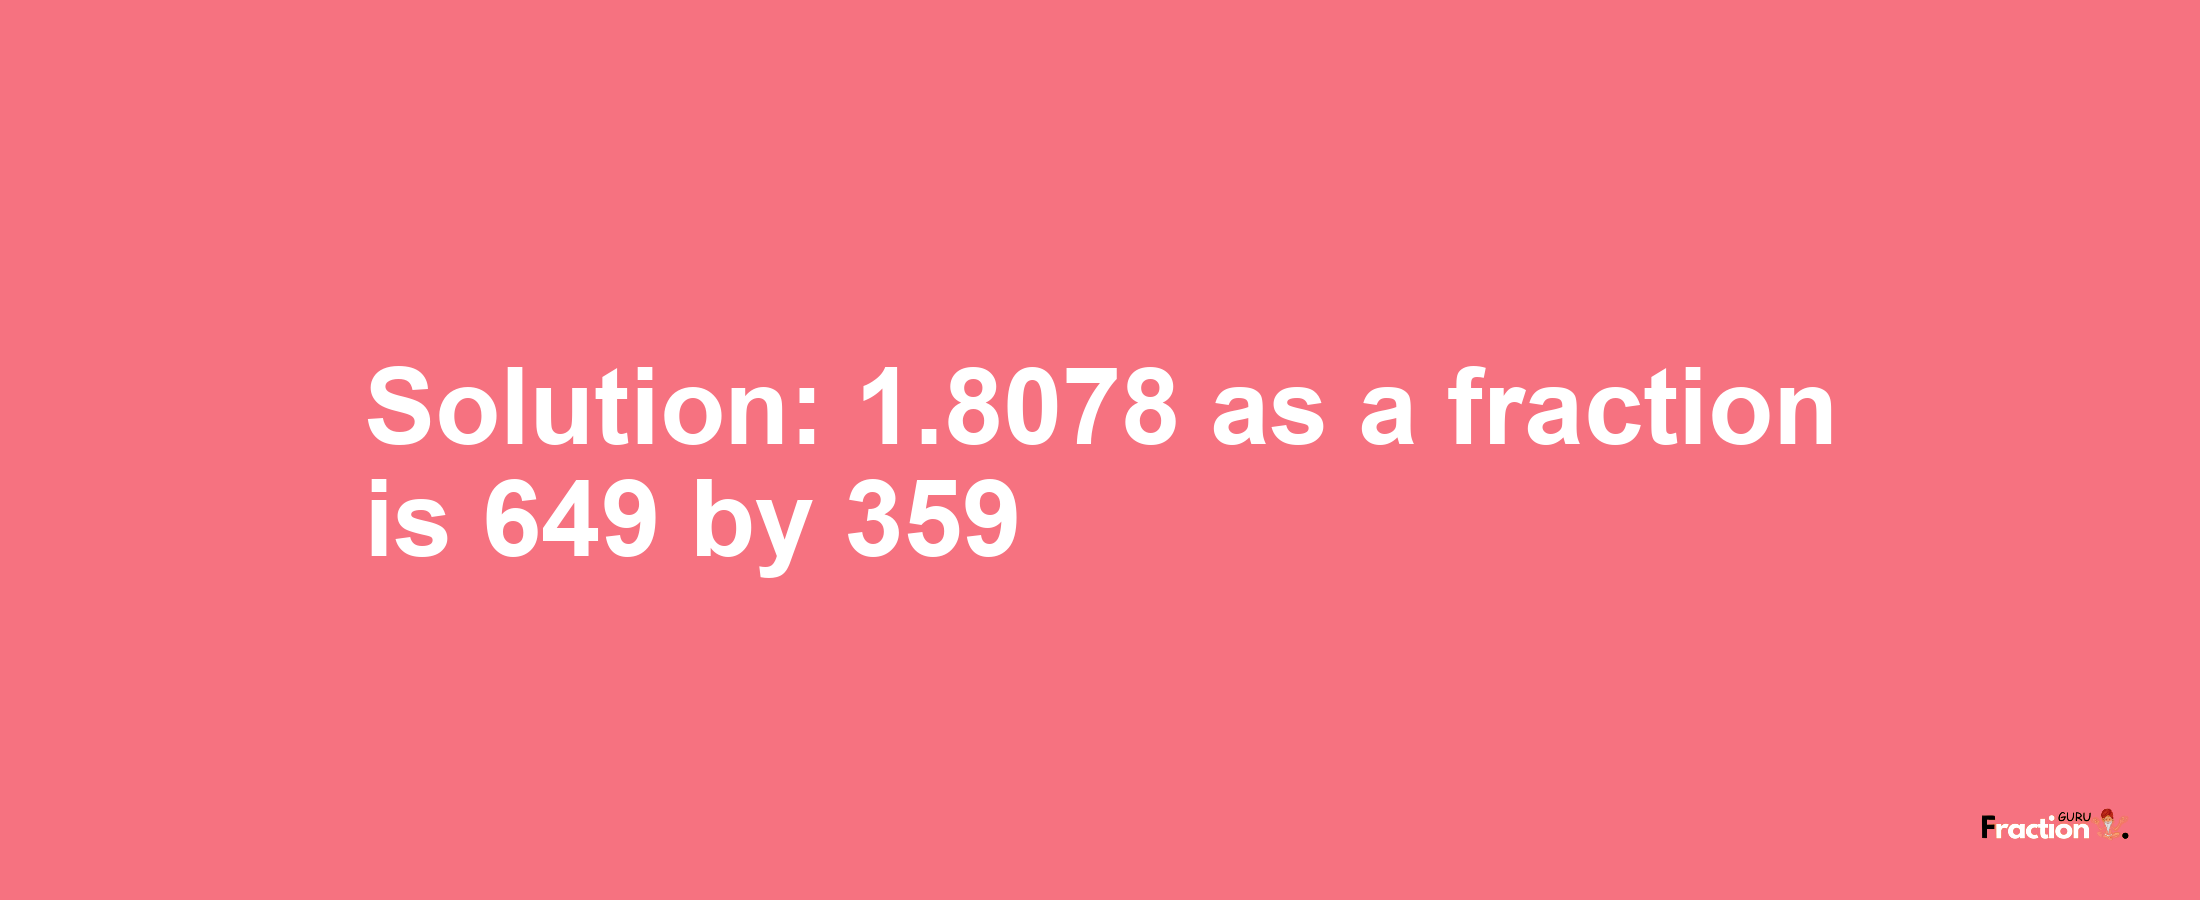 Solution:1.8078 as a fraction is 649/359